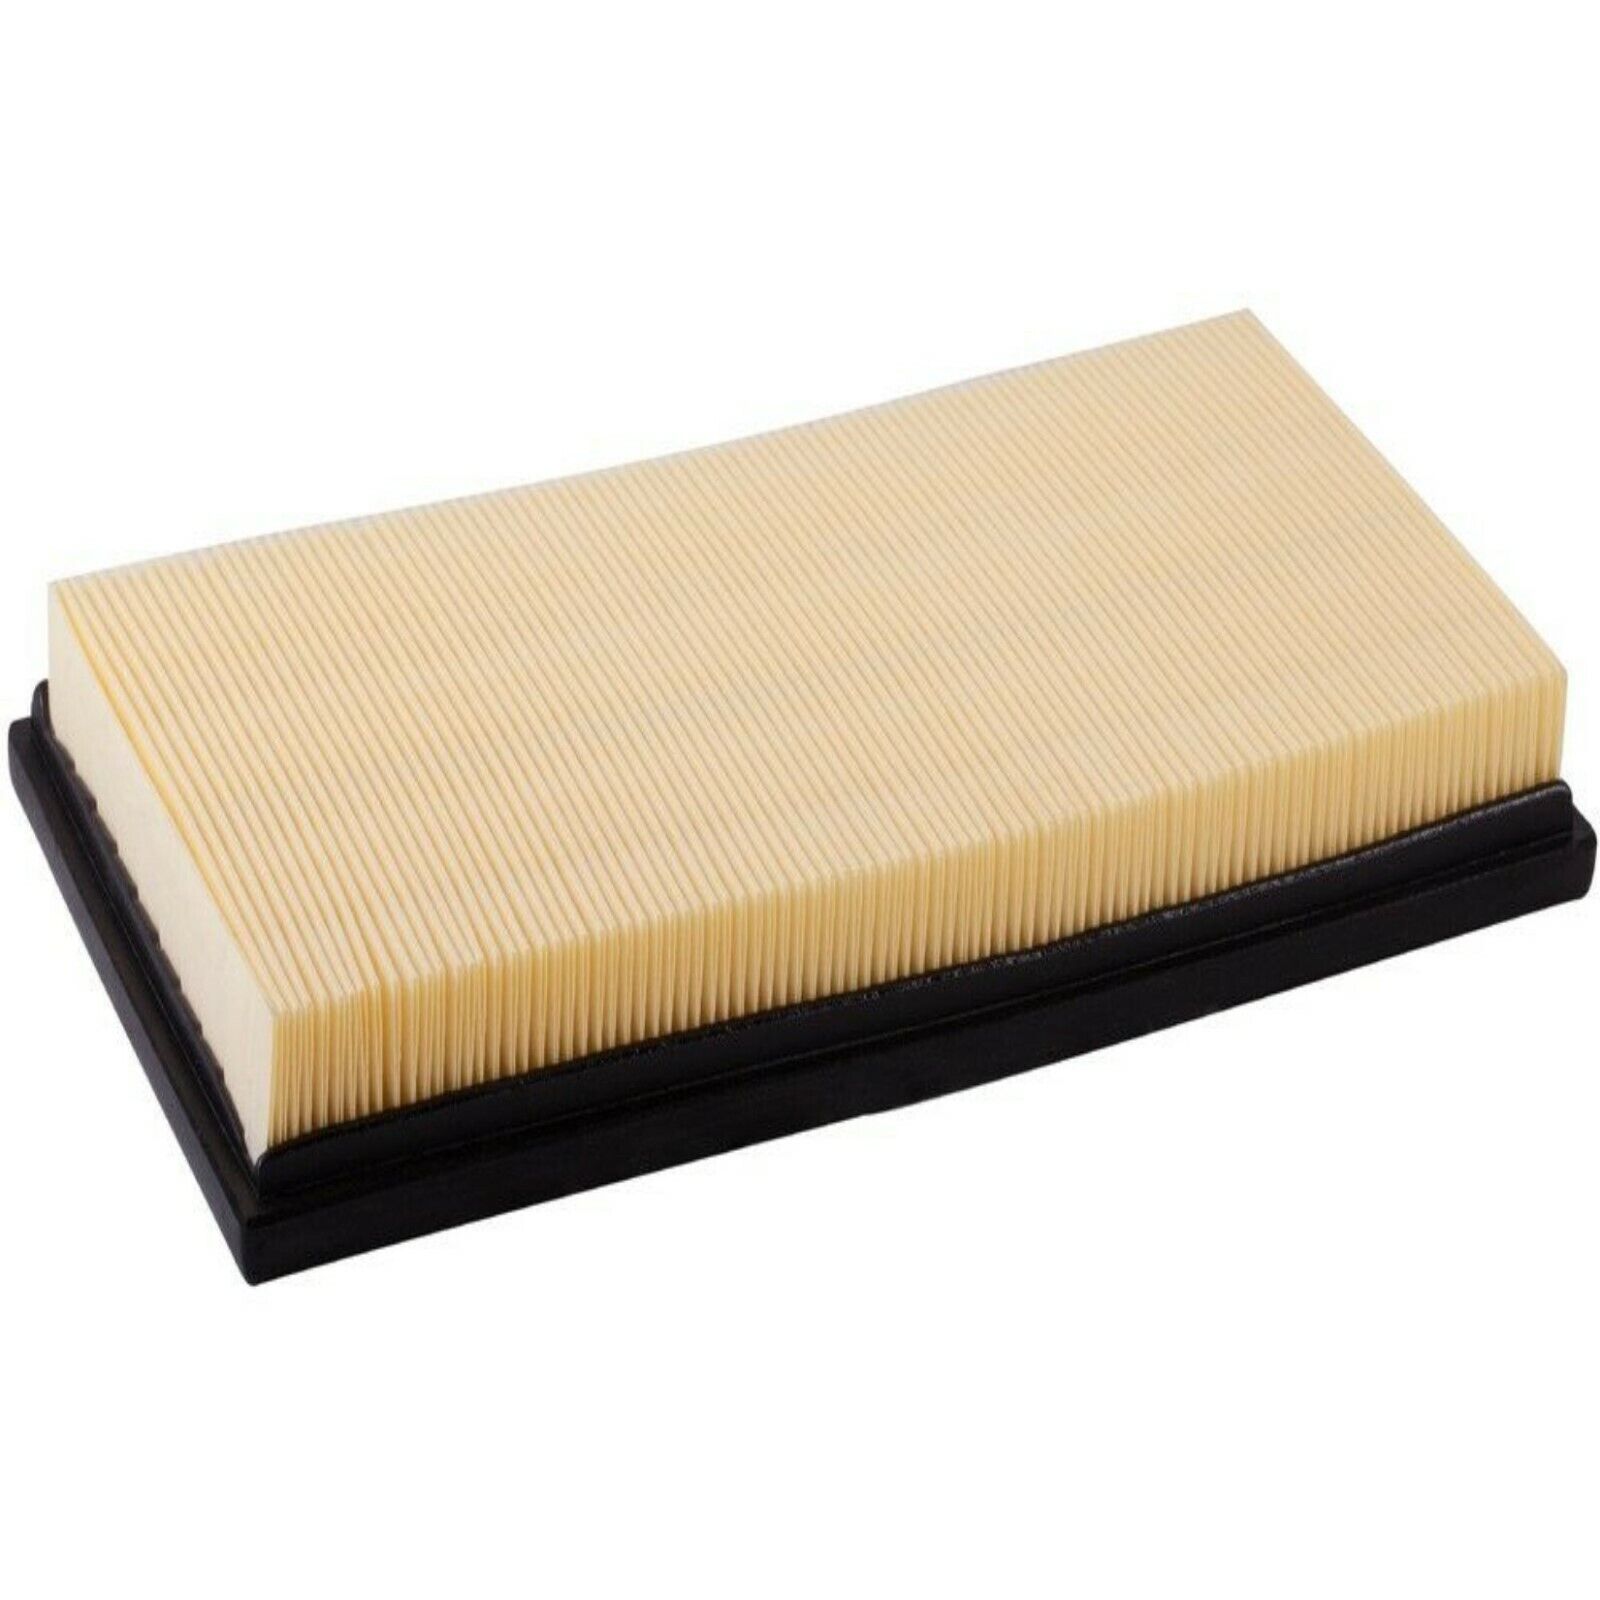 AF5258 Premium AIR FILTER For Kia Sephia and Spectra 1.8L Engine